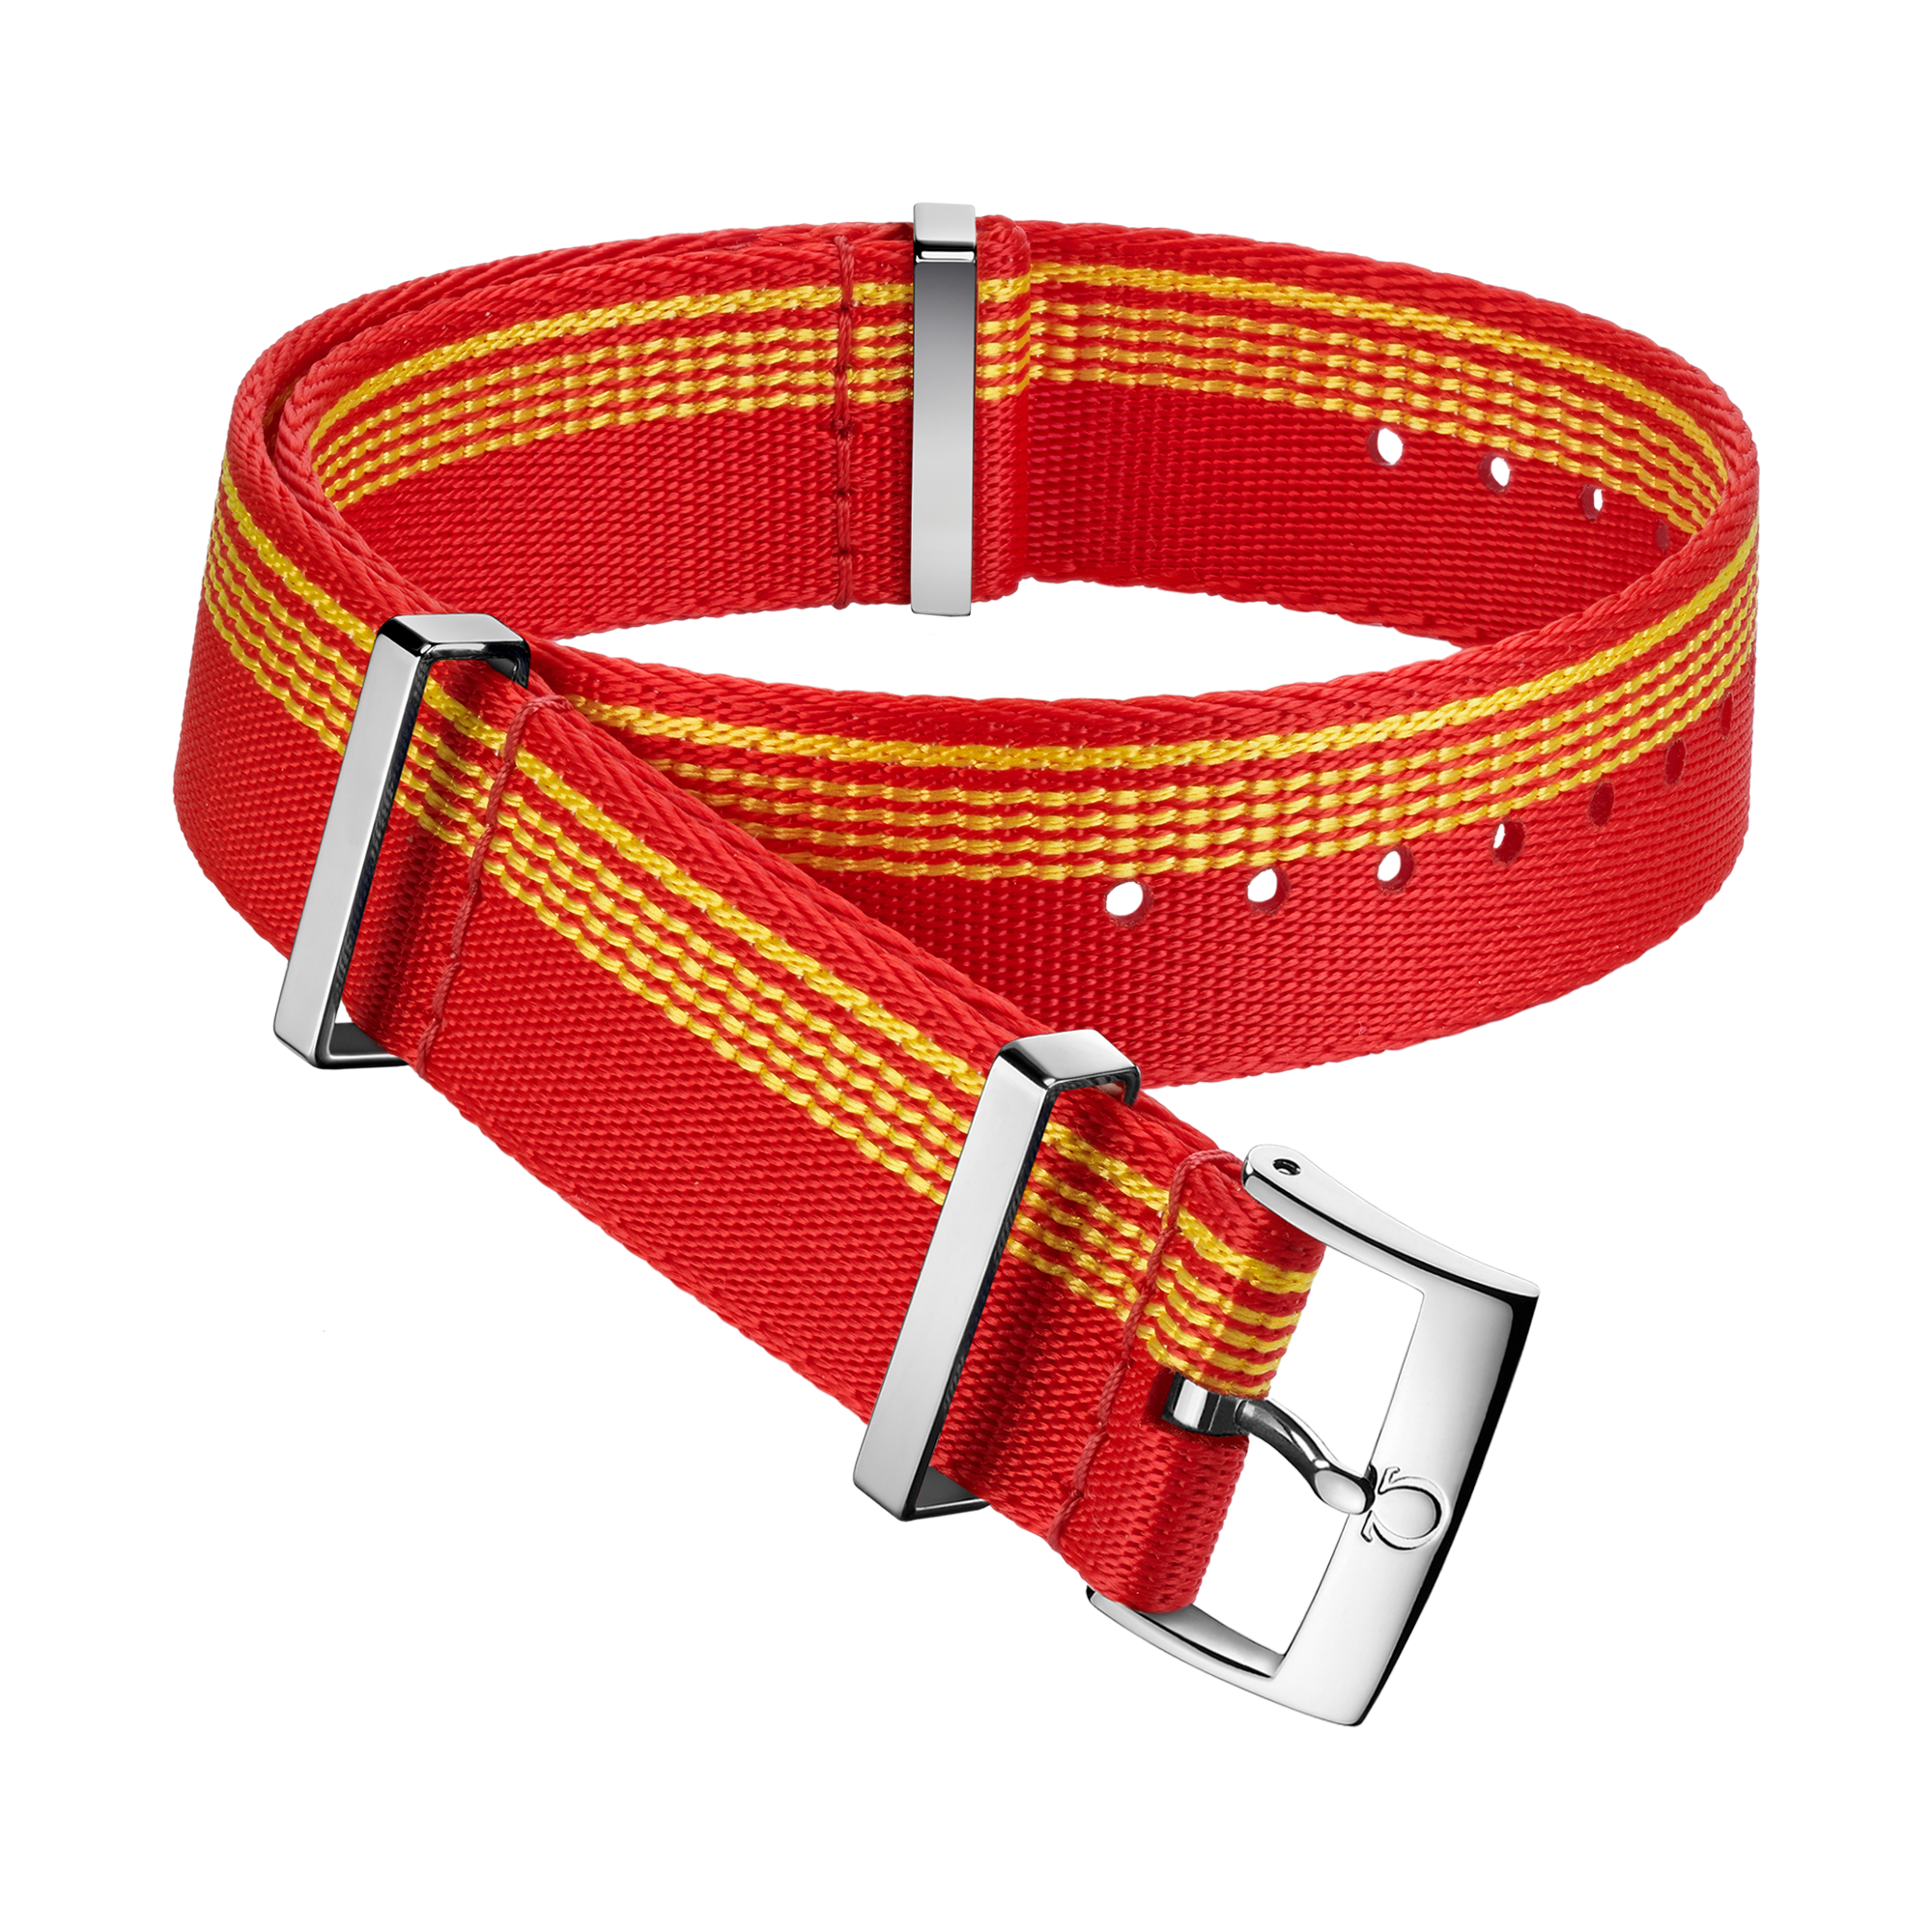 NATO strap - Polyamide red strap with yellow stripes - 031CWZ010620